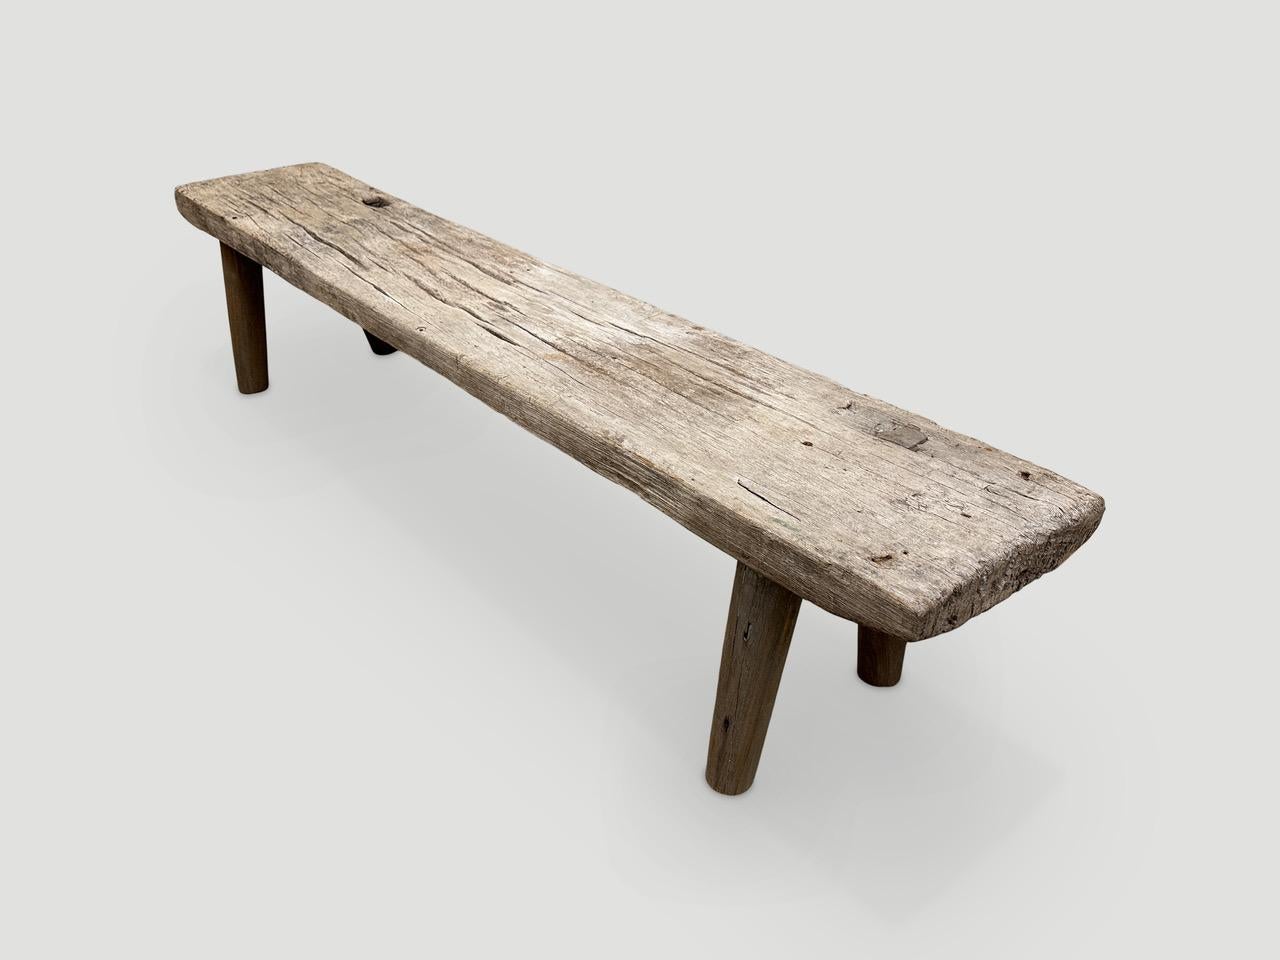 Antique Wabi Sabi teak bench celebrating the cracks and crevices and all the other marks that time and loving use have left behind. We added smooth teak minimalist legs to this beautiful thick aged panel. It’s all in the details.

This bench was